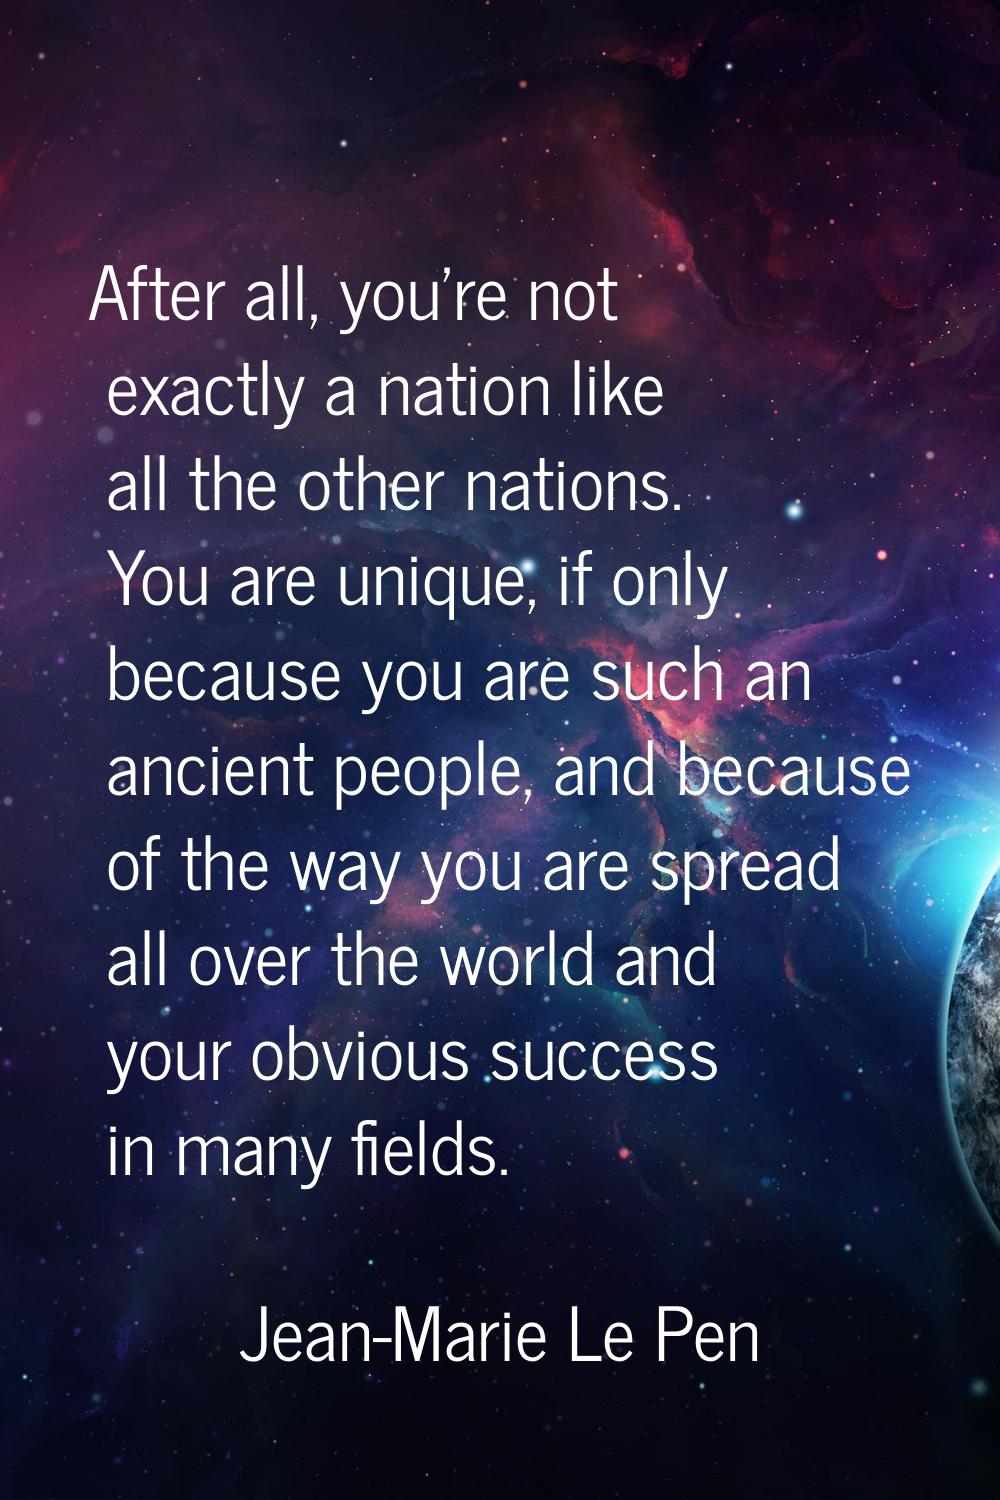 After all, you're not exactly a nation like all the other nations. You are unique, if only because 